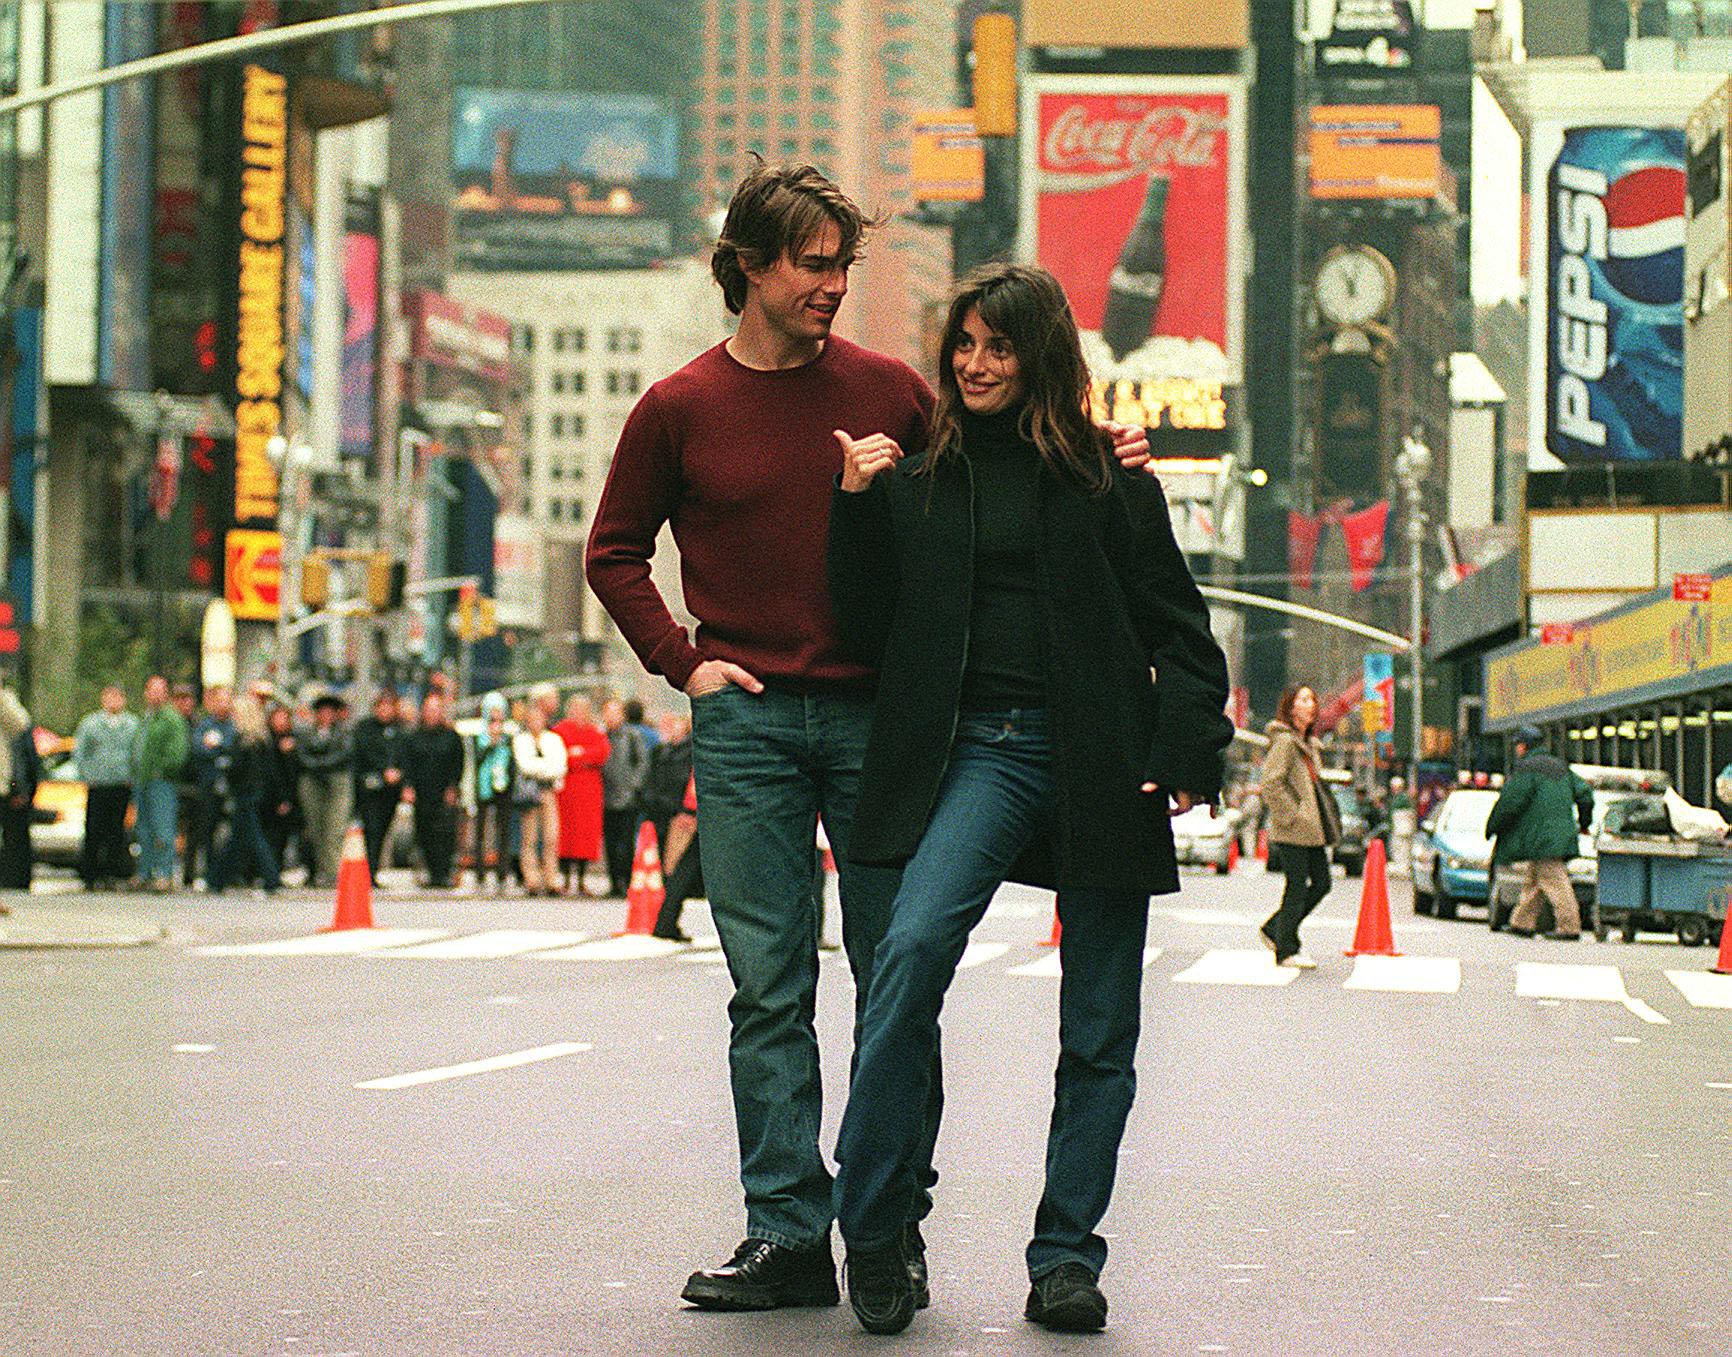 Tom Cruise and Penelope Cruz film a scene of their new movie, Vanilla Sky, in New York's Times Square November 12, 2000. | Source: Getty Images